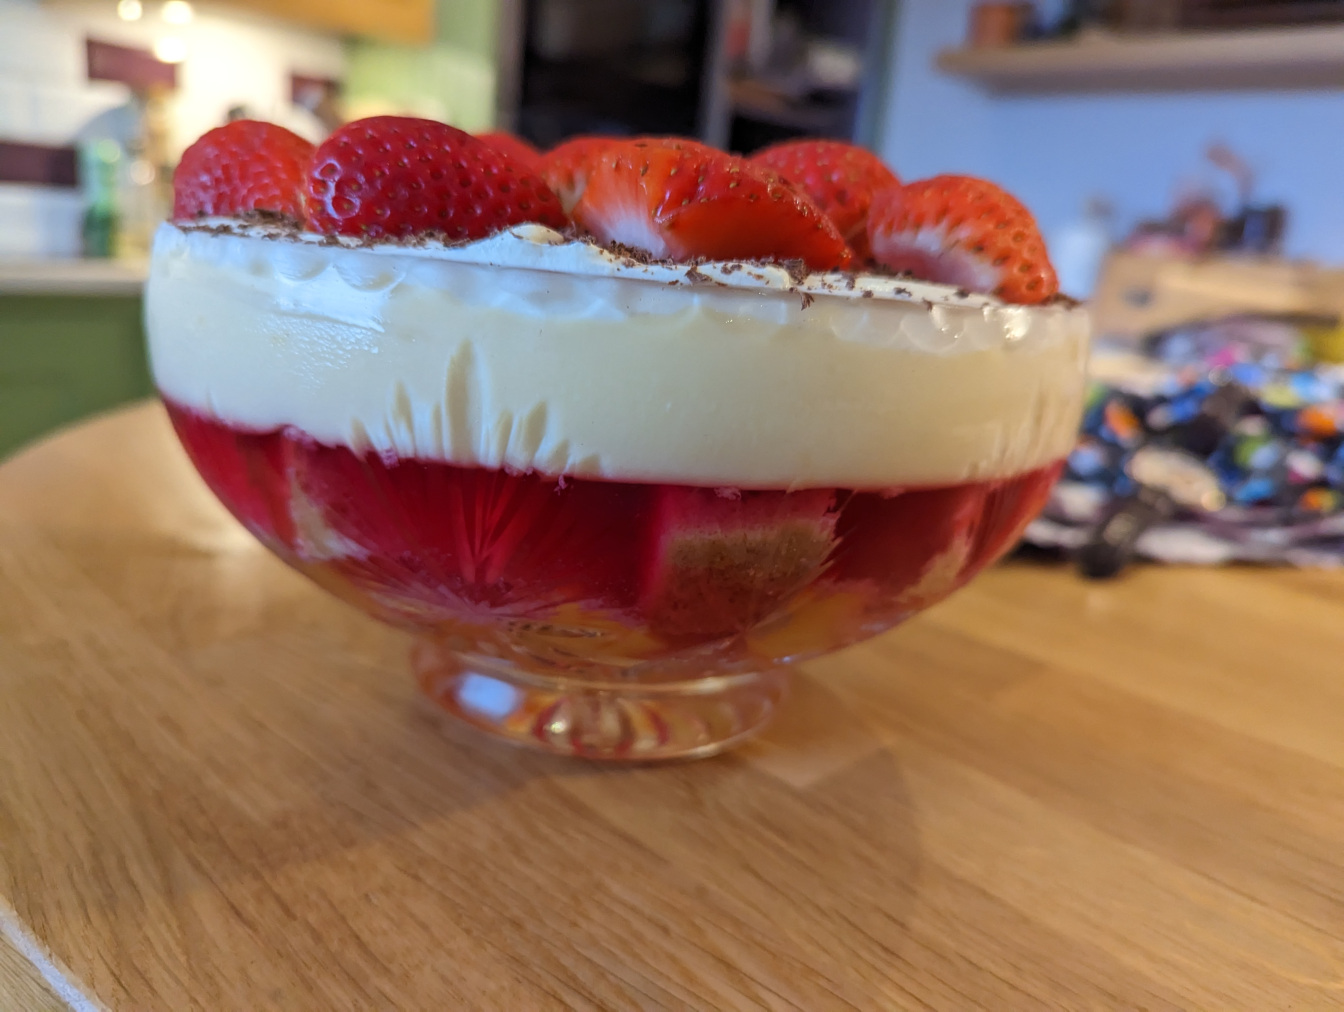 Layers of the trifle